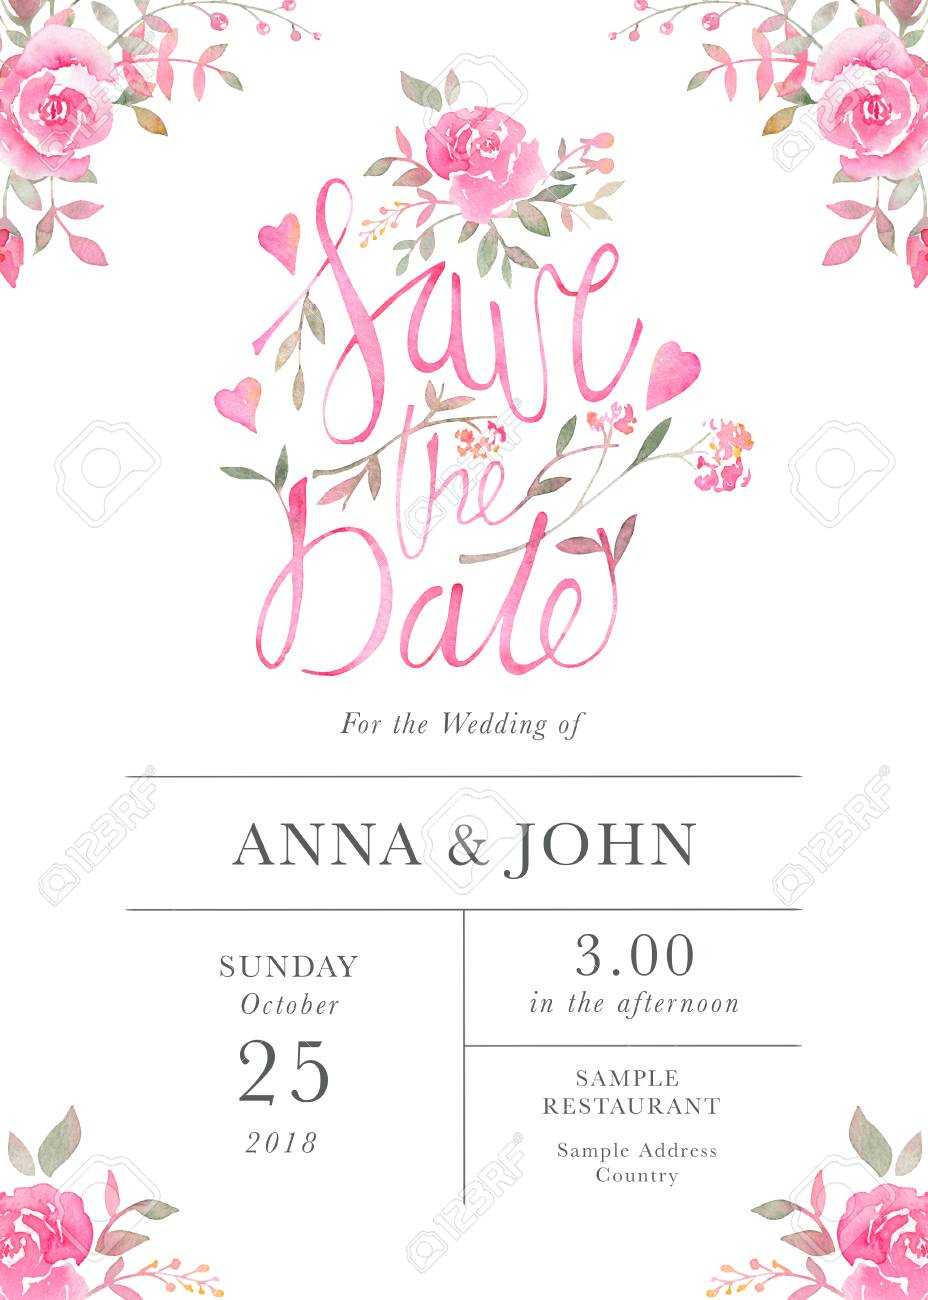 Wedding Invitation Card Template With Watercolor Rose Flowers Throughout Sample Wedding Invitation Cards Templates